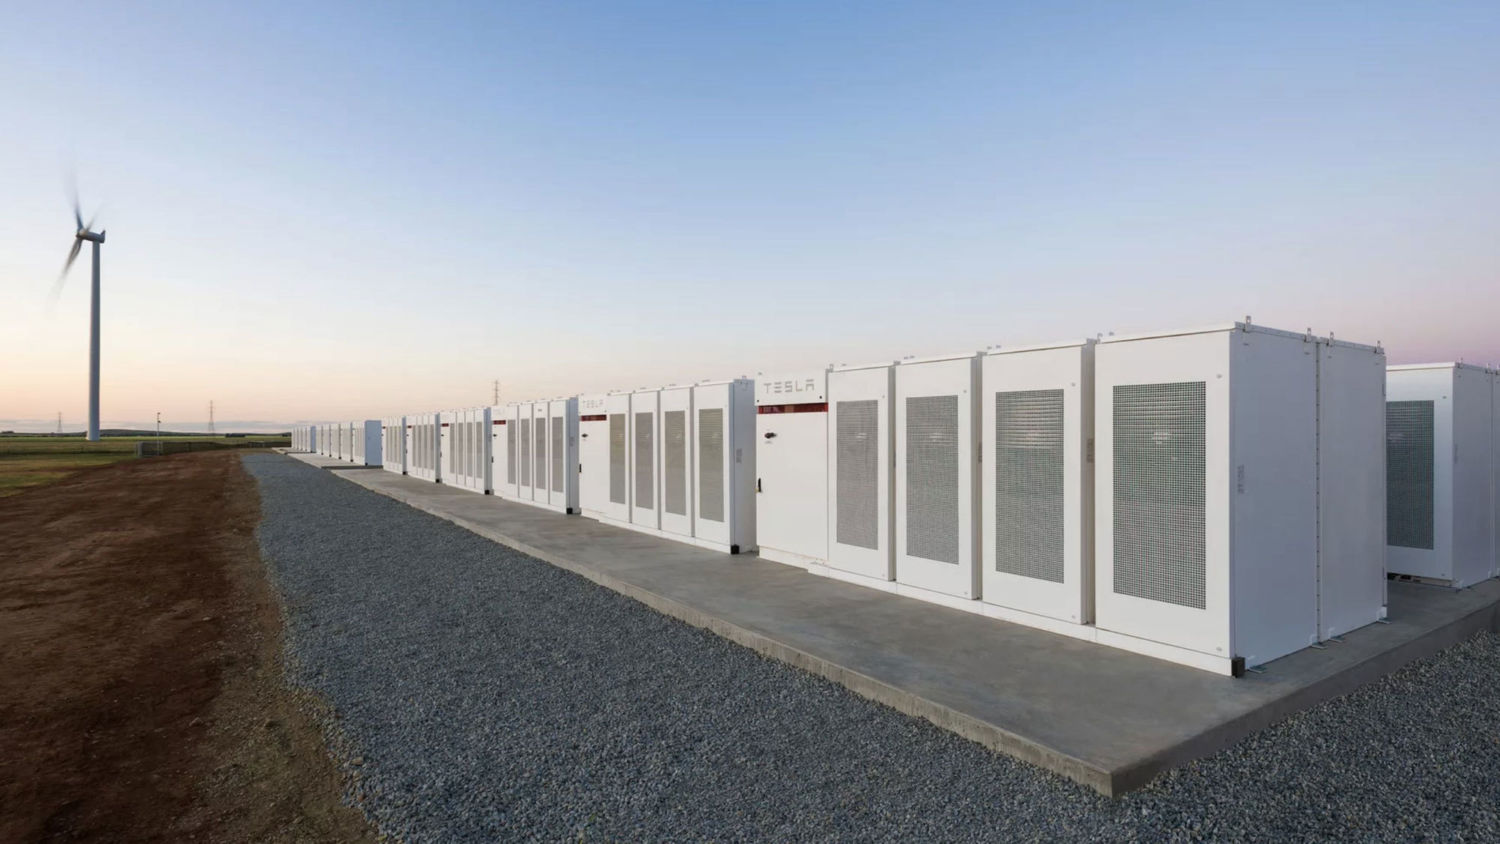 In Boost For Renewables Grid Scale Battery Storage Is On The Rise Yale E360 